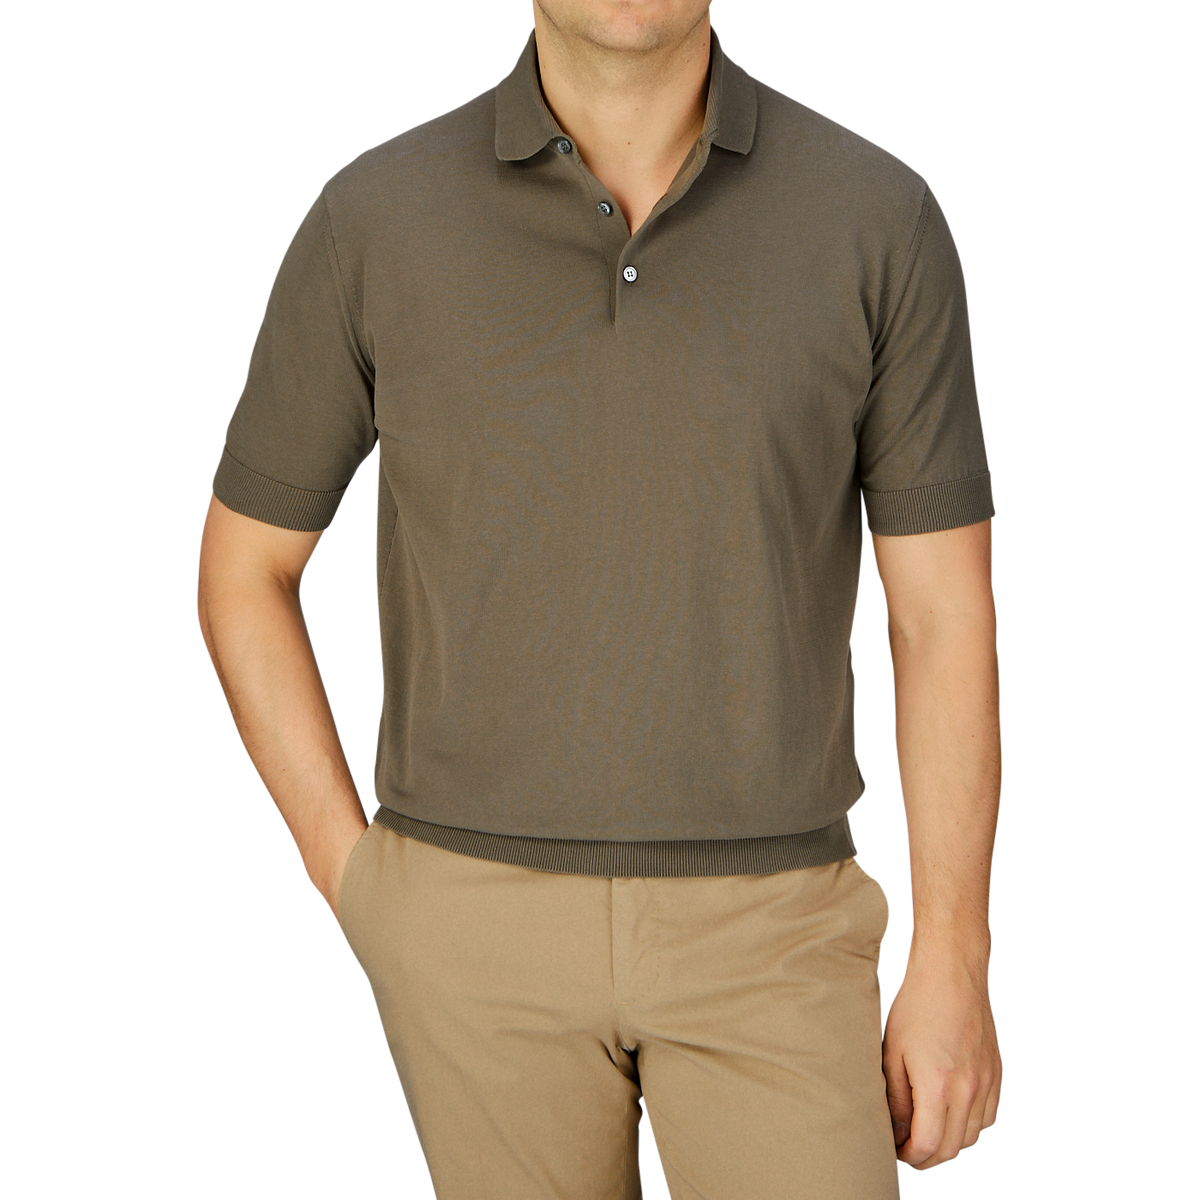 Man wearing a Filippo de Laurentiis Olive Green Crepe Cotton Polo Shirt and beige pants against a gray background.